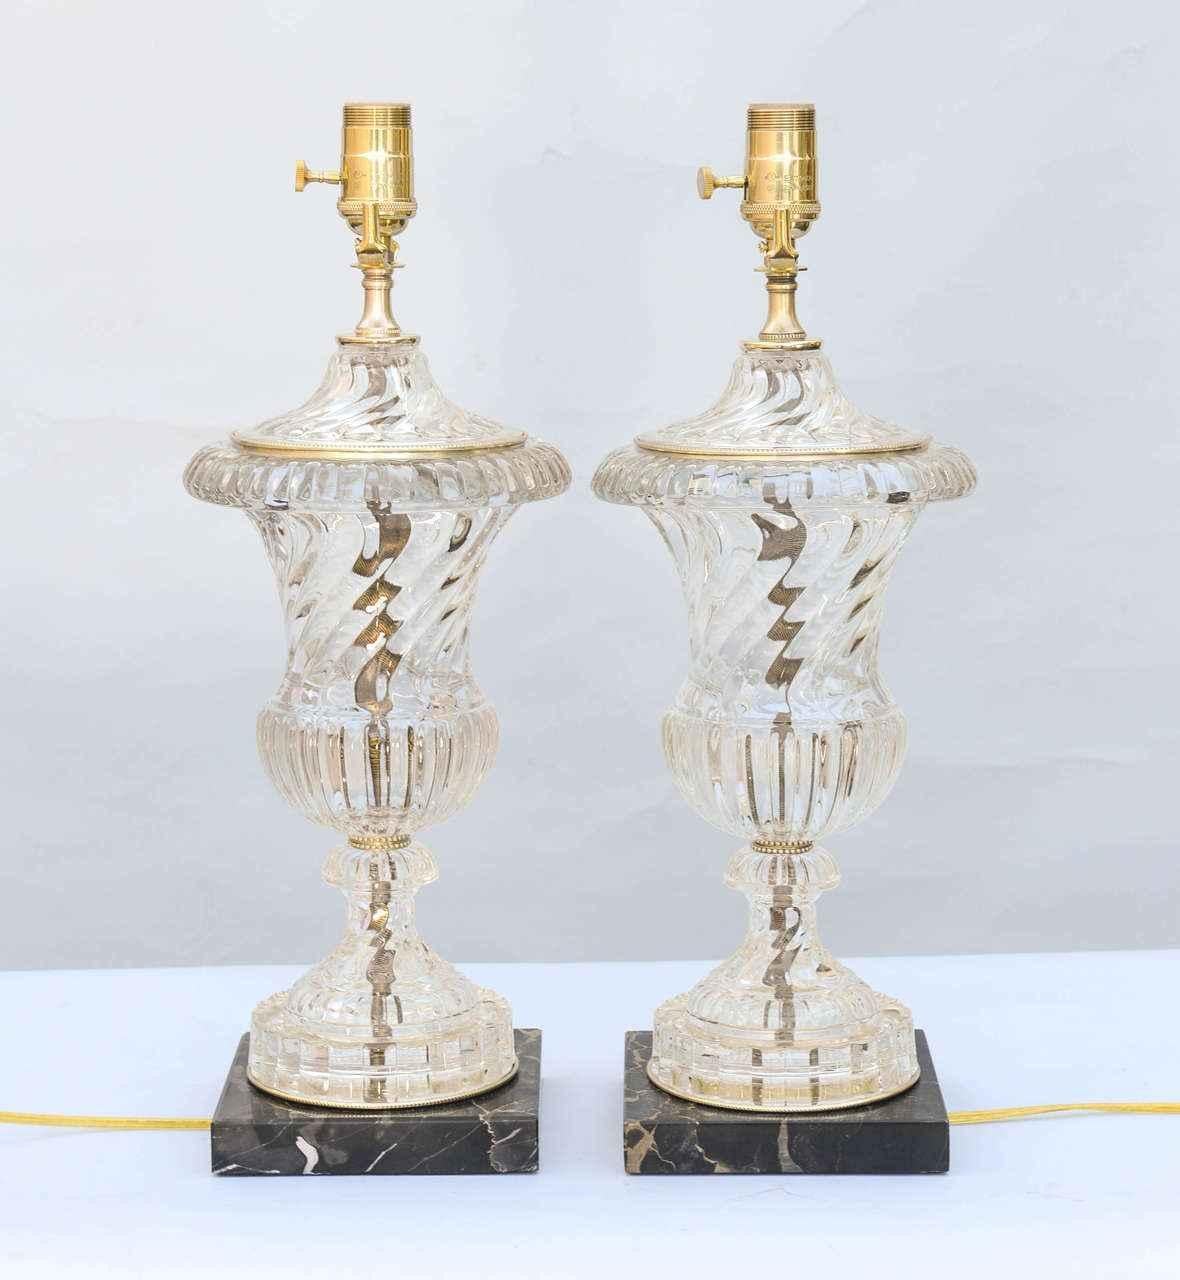 20th Century Pair of Spiral Urn Baccarat Glass Lamps